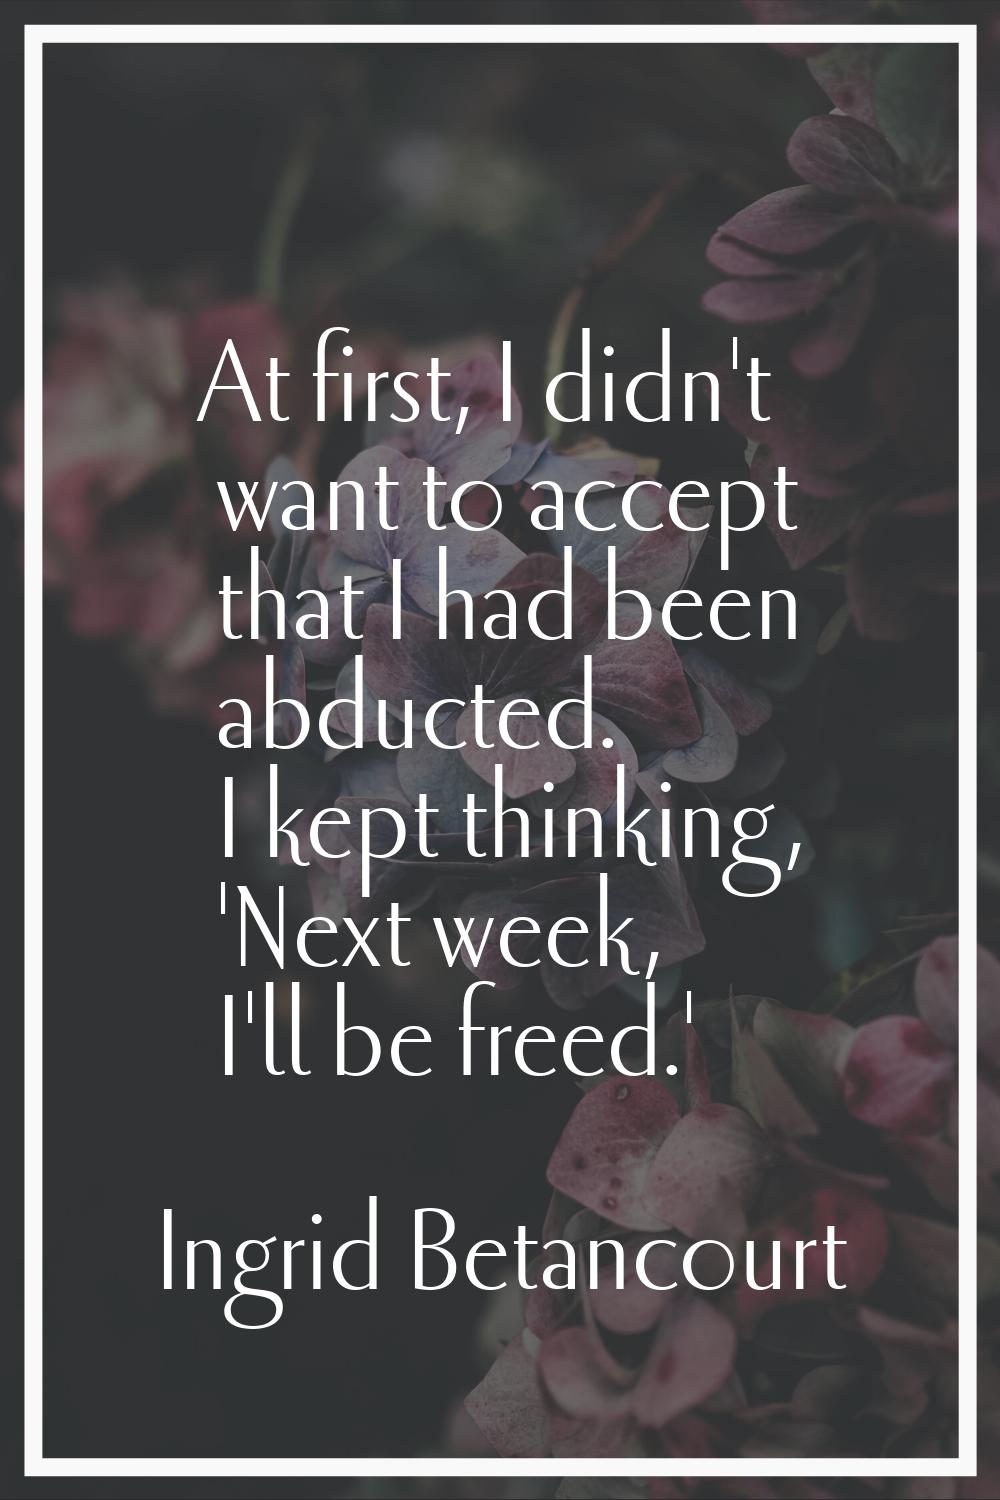 At first, I didn't want to accept that I had been abducted. I kept thinking, 'Next week, I'll be fr